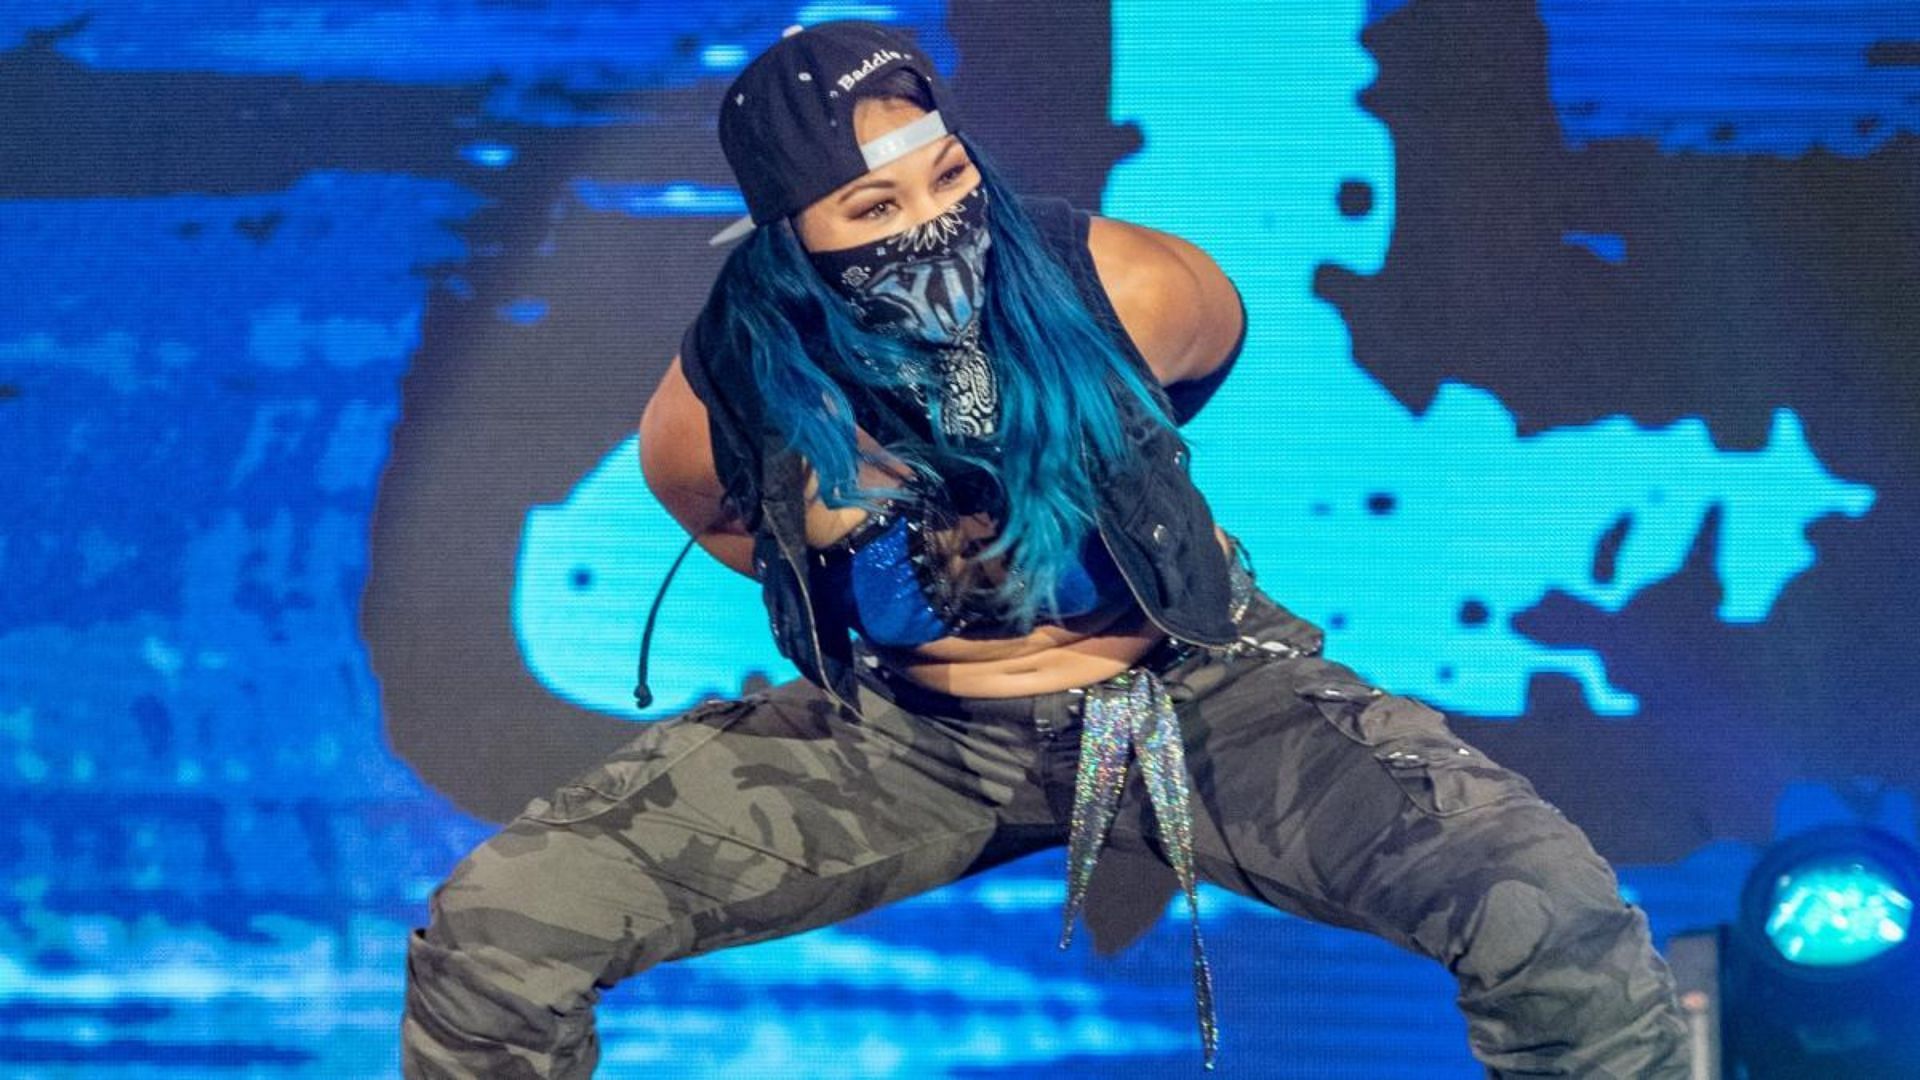 Mia Yim was released by WWE in November 2021